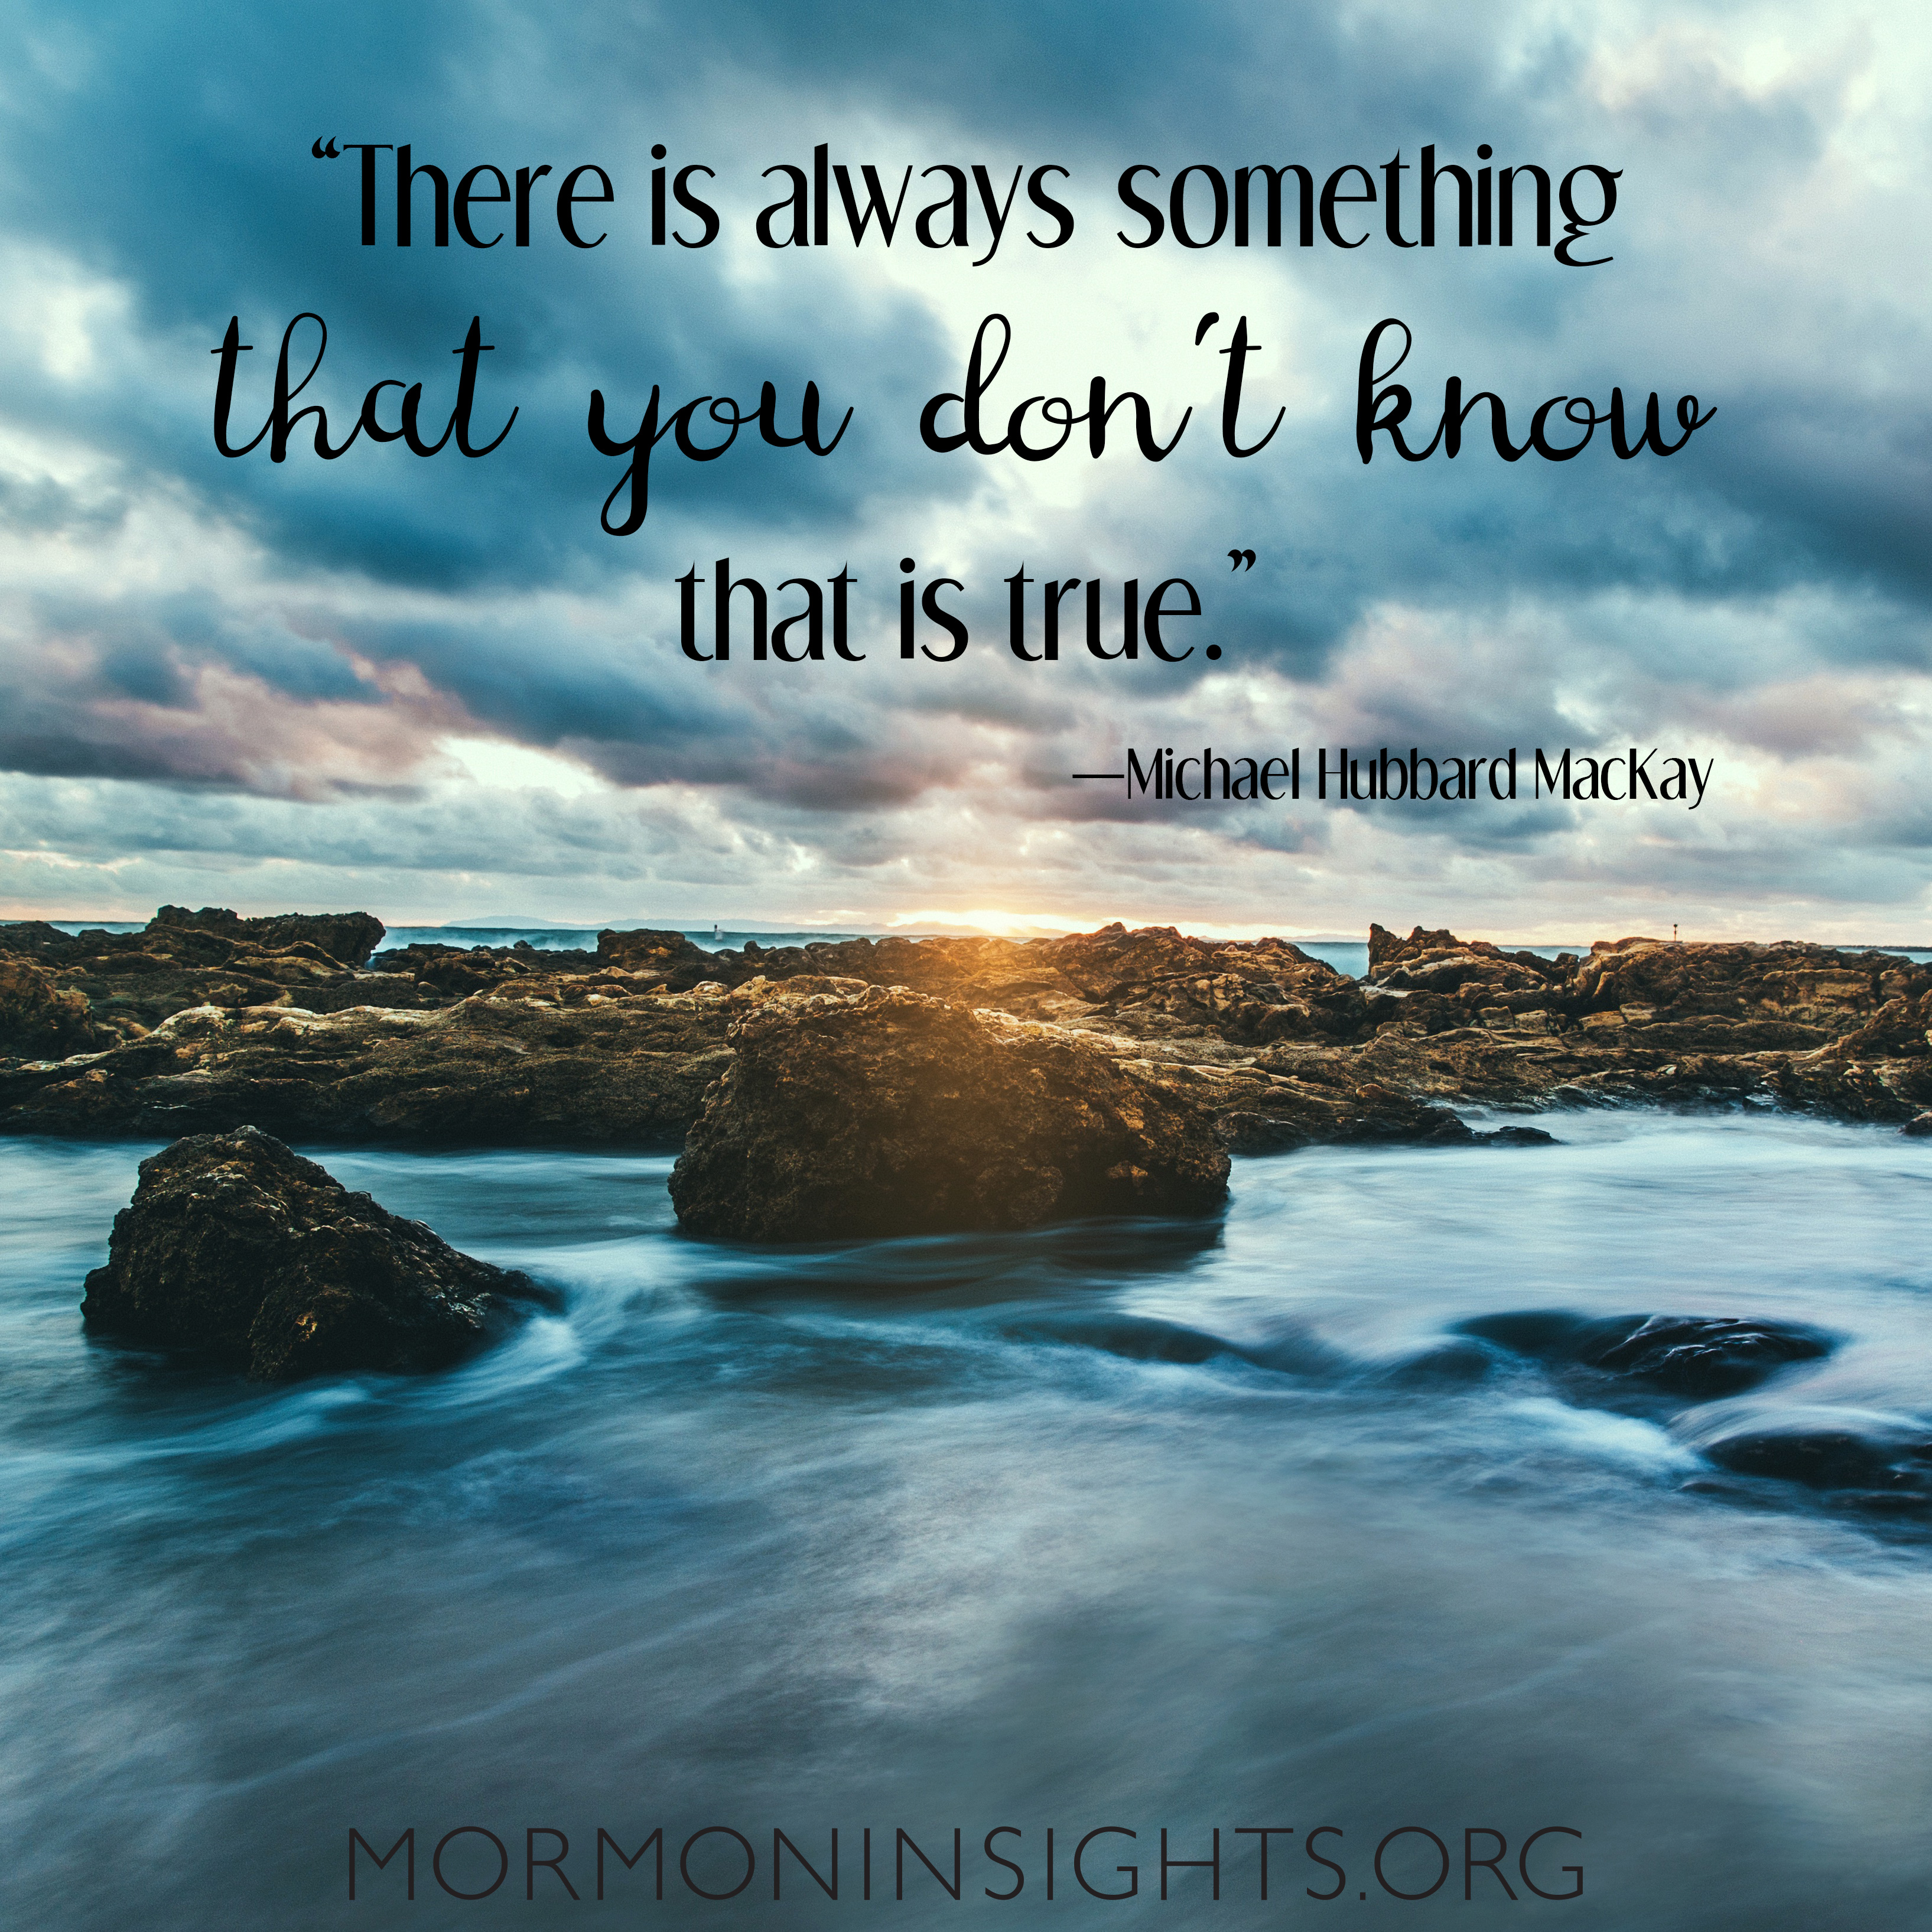 Picture quote. Background says "There is always something that you don't know that is true." on background of rocks and water